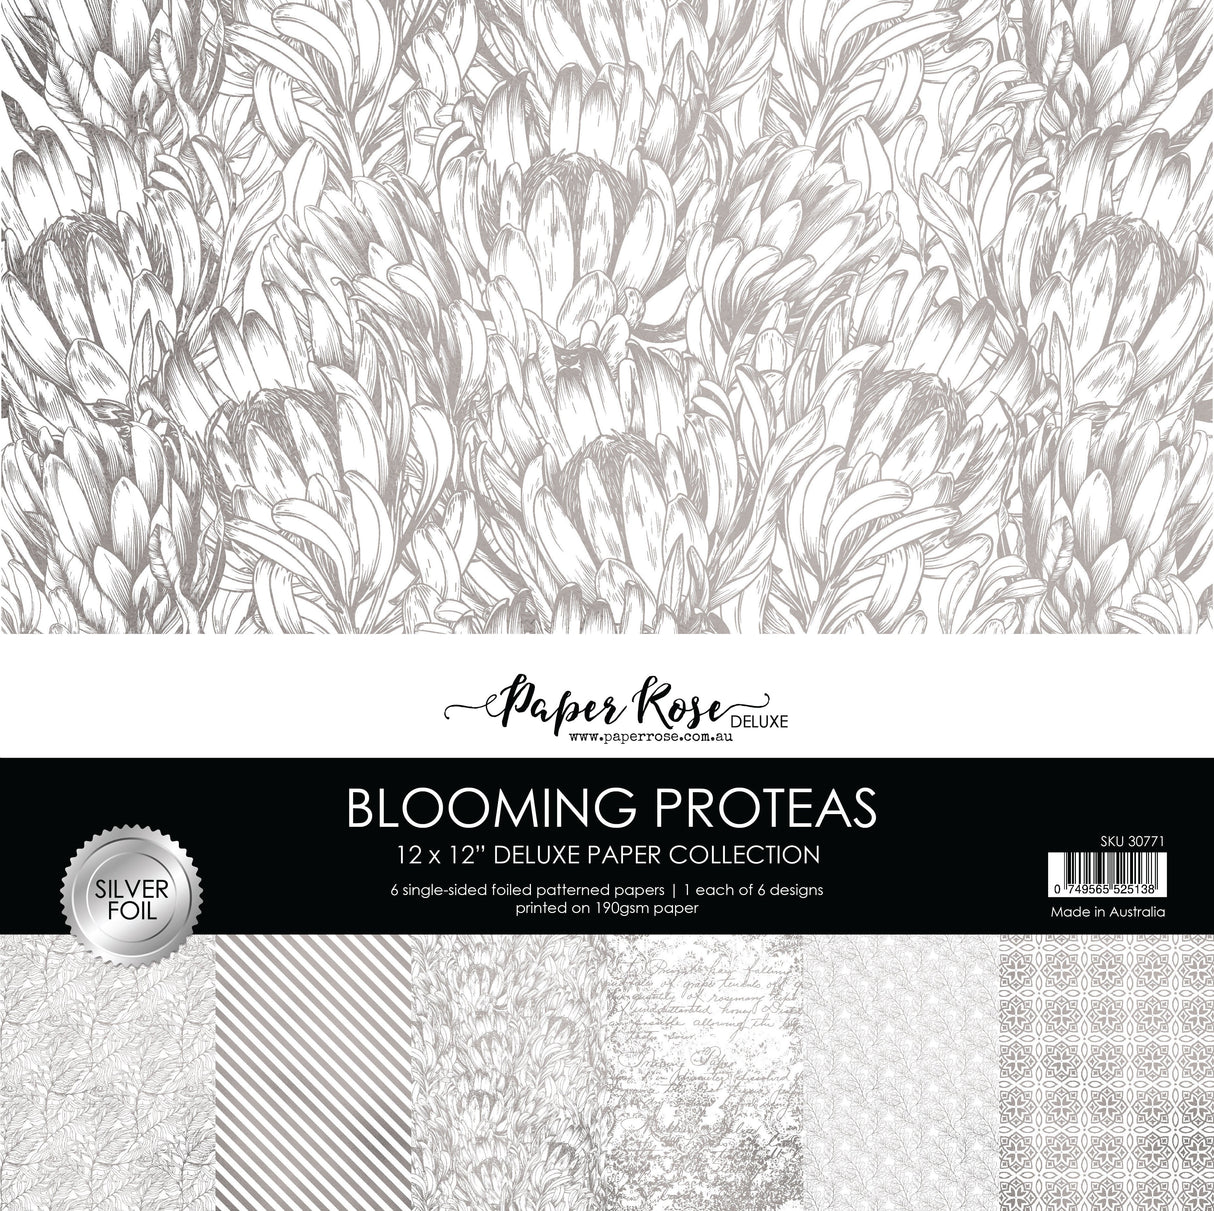 Blooming Proteas - Silver Foil 12x12 Paper Collection 30771 - Paper Rose Studio